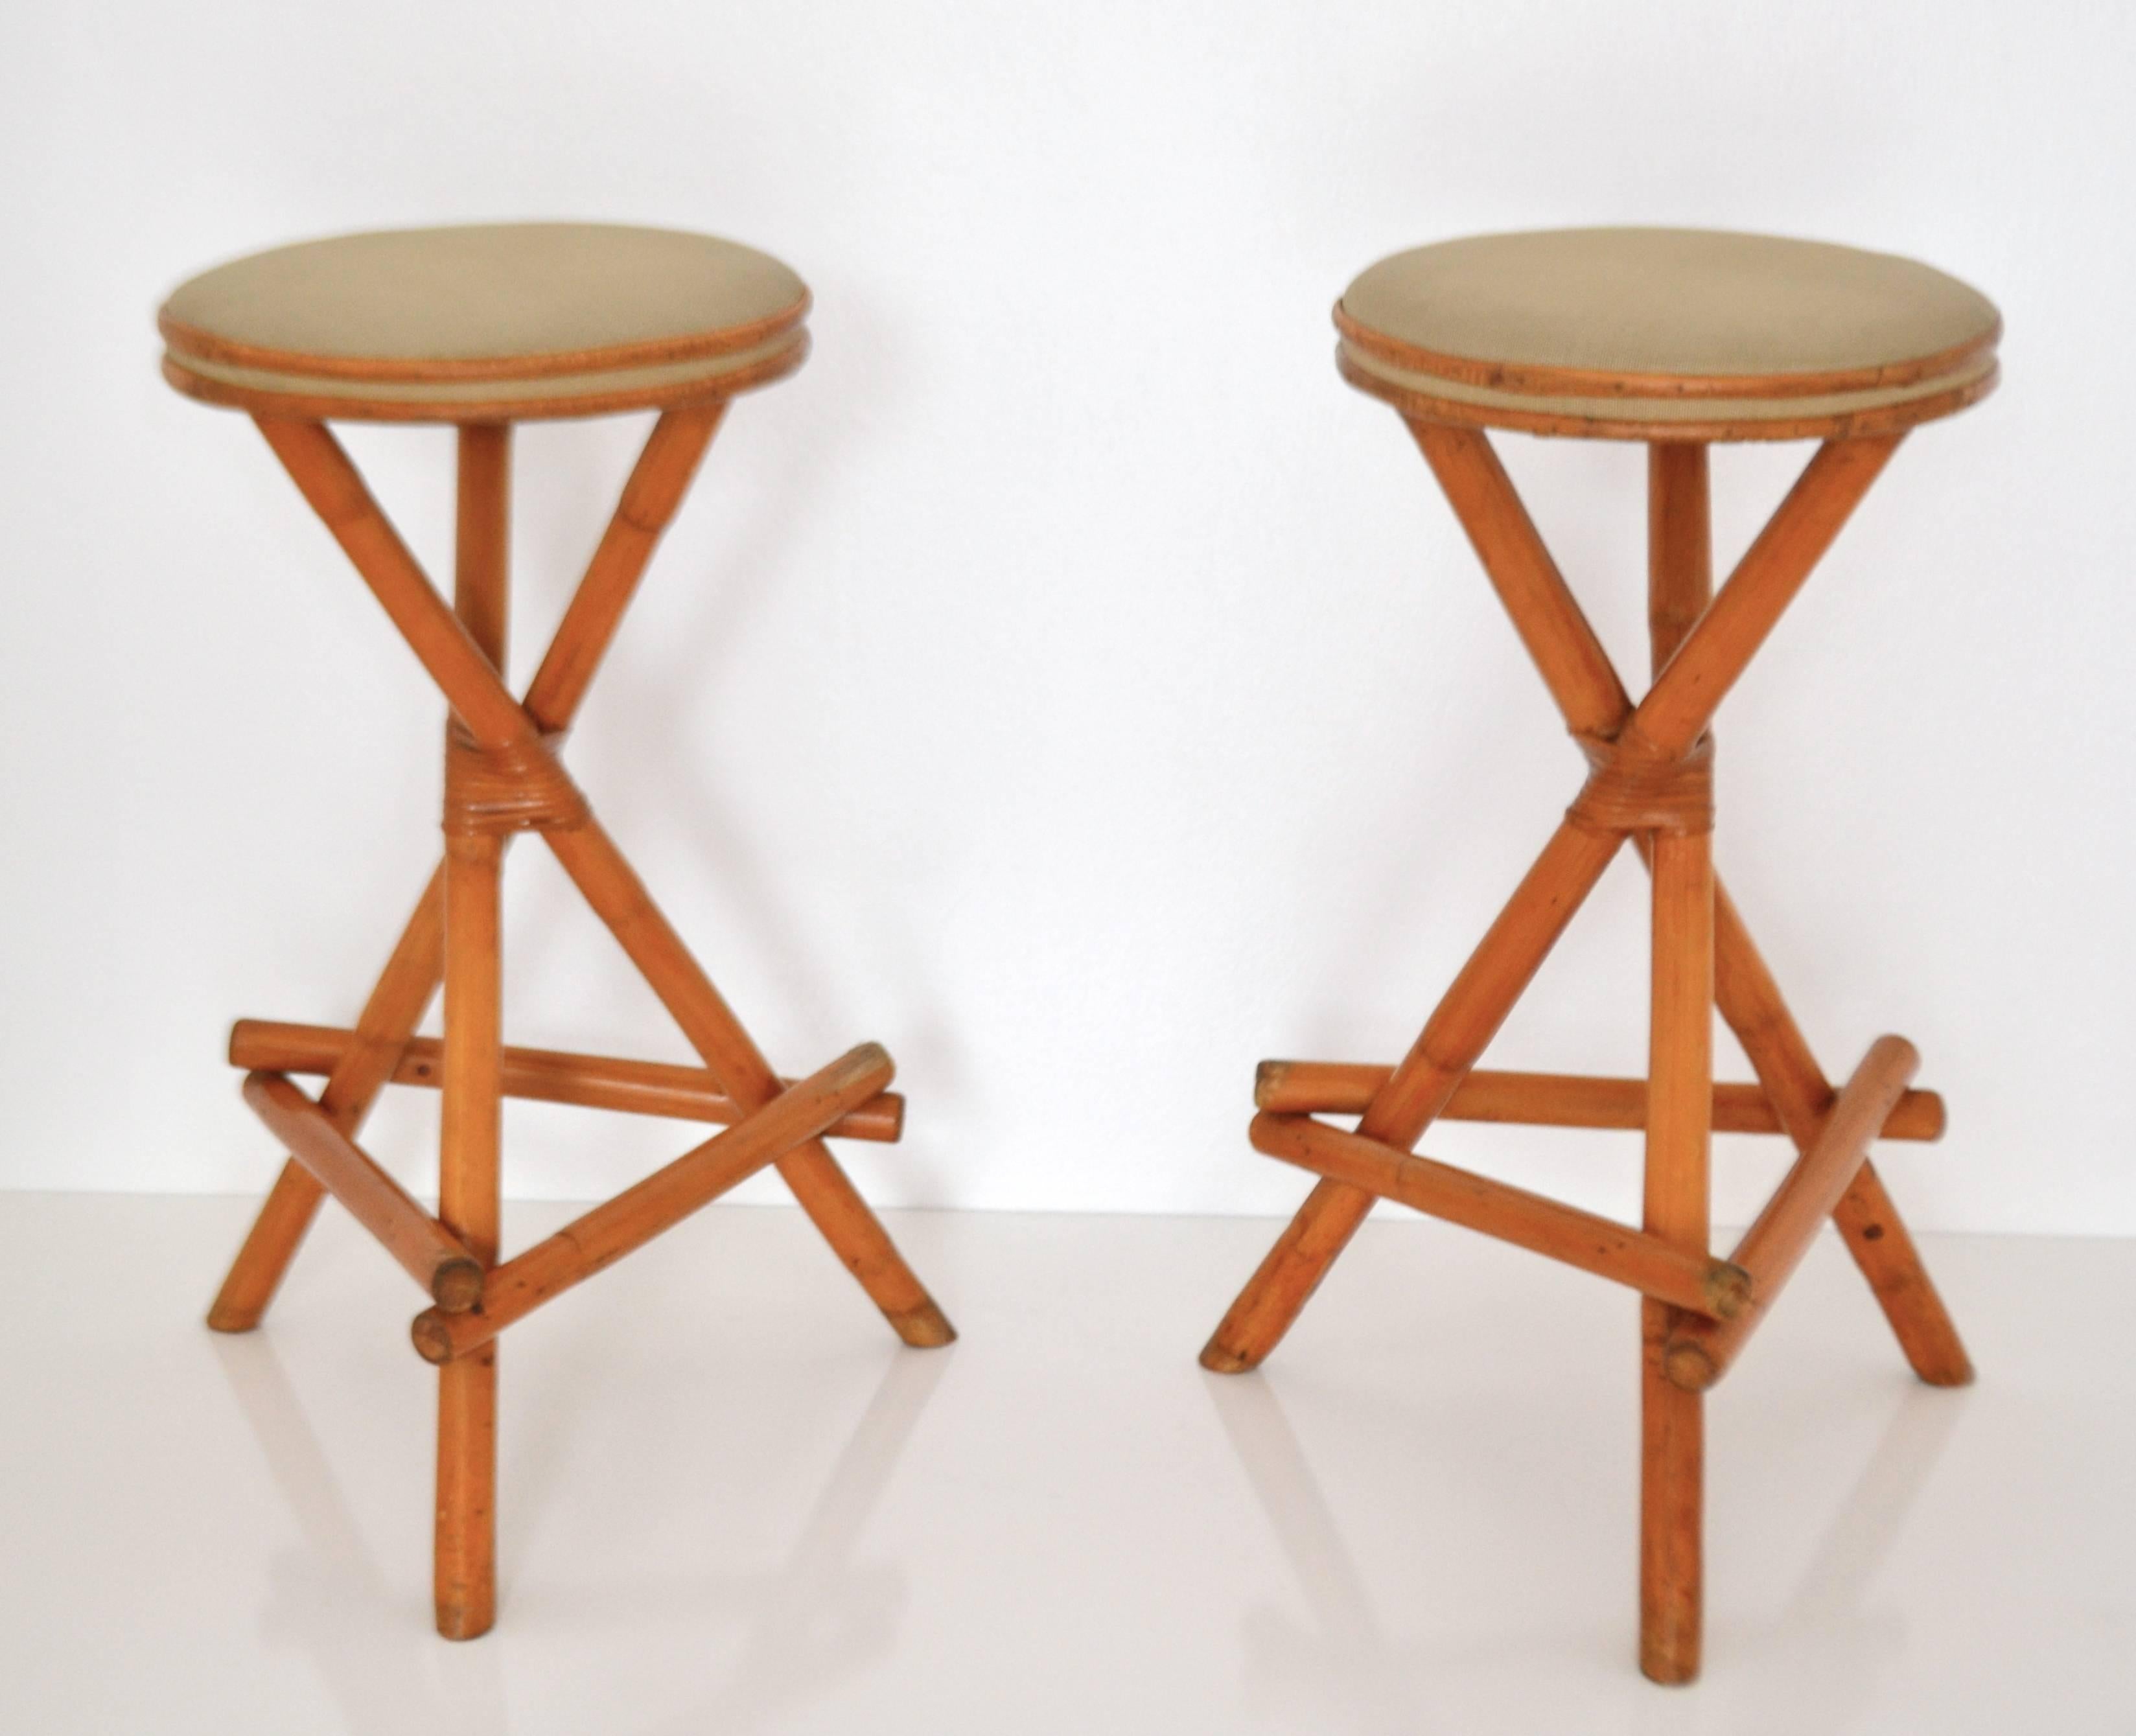 Striking pair of midcentury tripod form bamboo barstools, circa 1960s. These sculptural artisan crafted stools are designed of bent bamboo with cane wrapped accents and upholstered in a natural open weave canvas fabric.